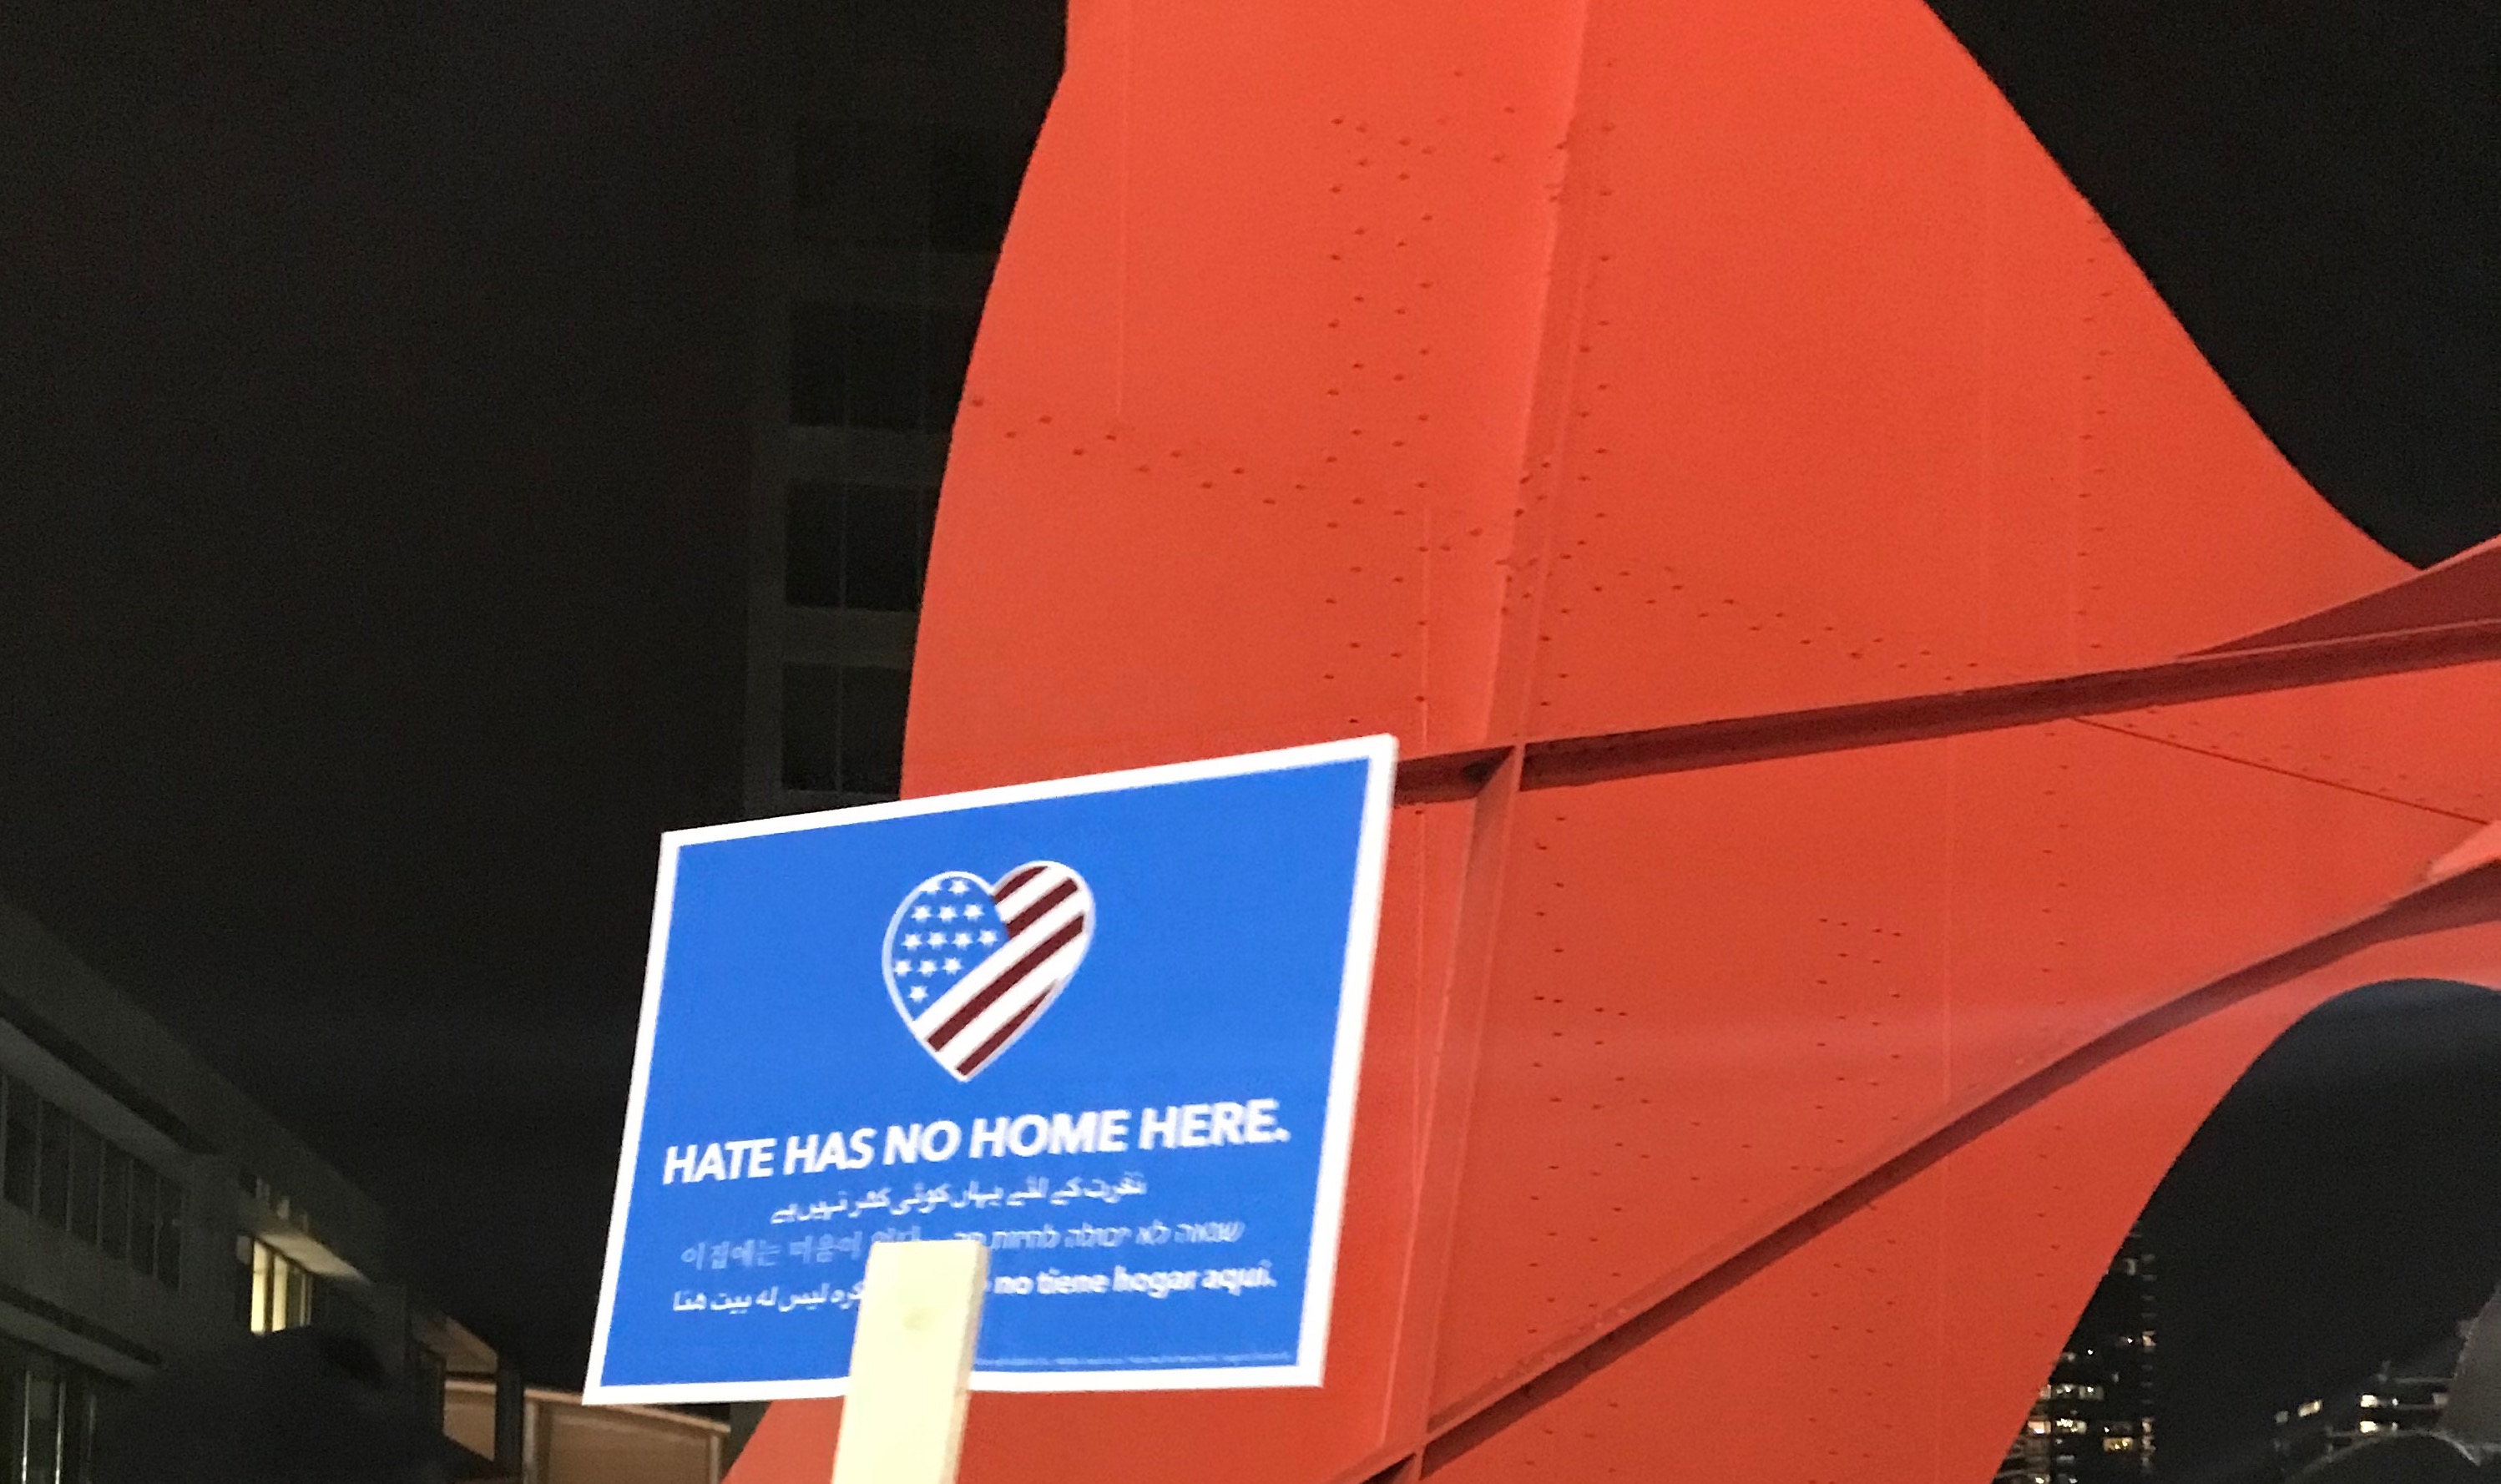 An image of the Calder sculpture in downtown Grand Rapids Michigan with a sign held up in front of it that says Hate Has No Home Here in several languages.